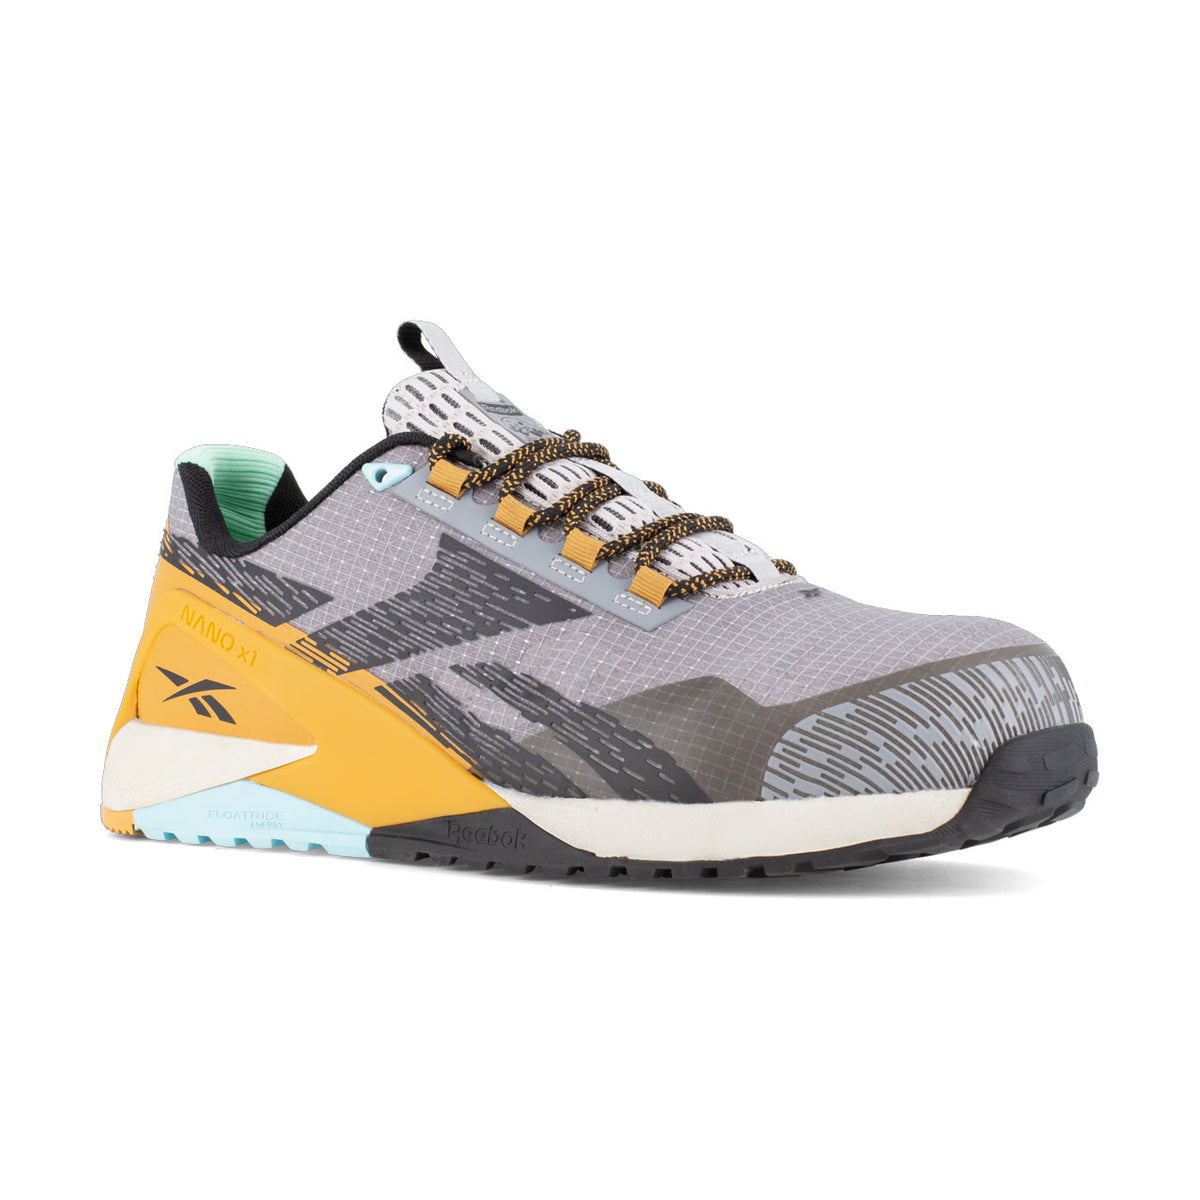 A single Reebok Work Nano X1 trail running shoe with a gray camouflage pattern and yellow accents, featuring a rugged sole and Floatride Energy Foam, displayed against a white background.